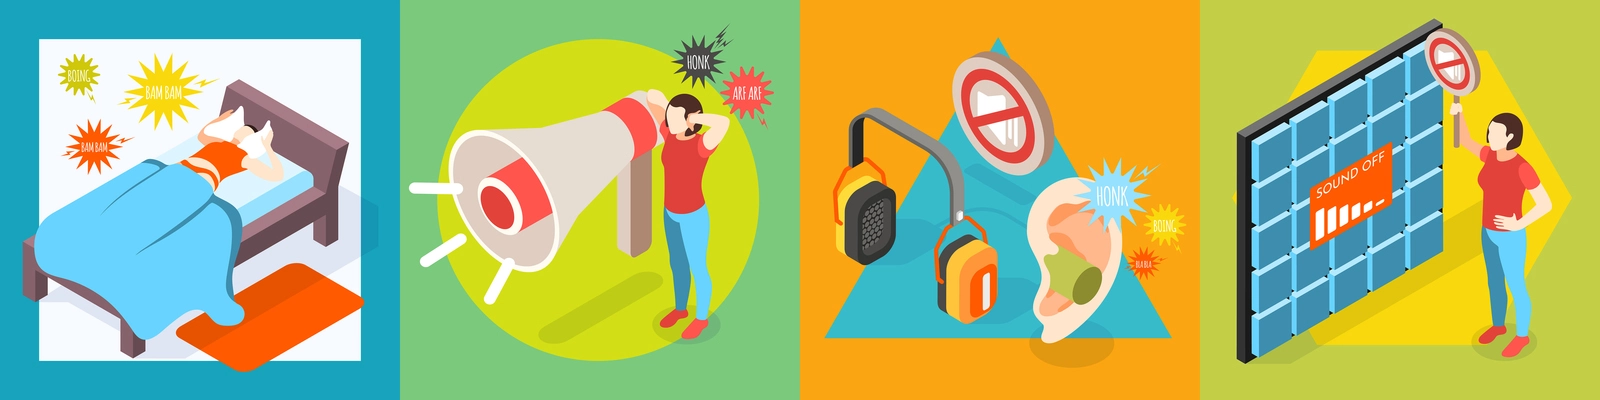 Noise pollution isometric design concept with solid background and icons of loud noises with suffering people vector illustration